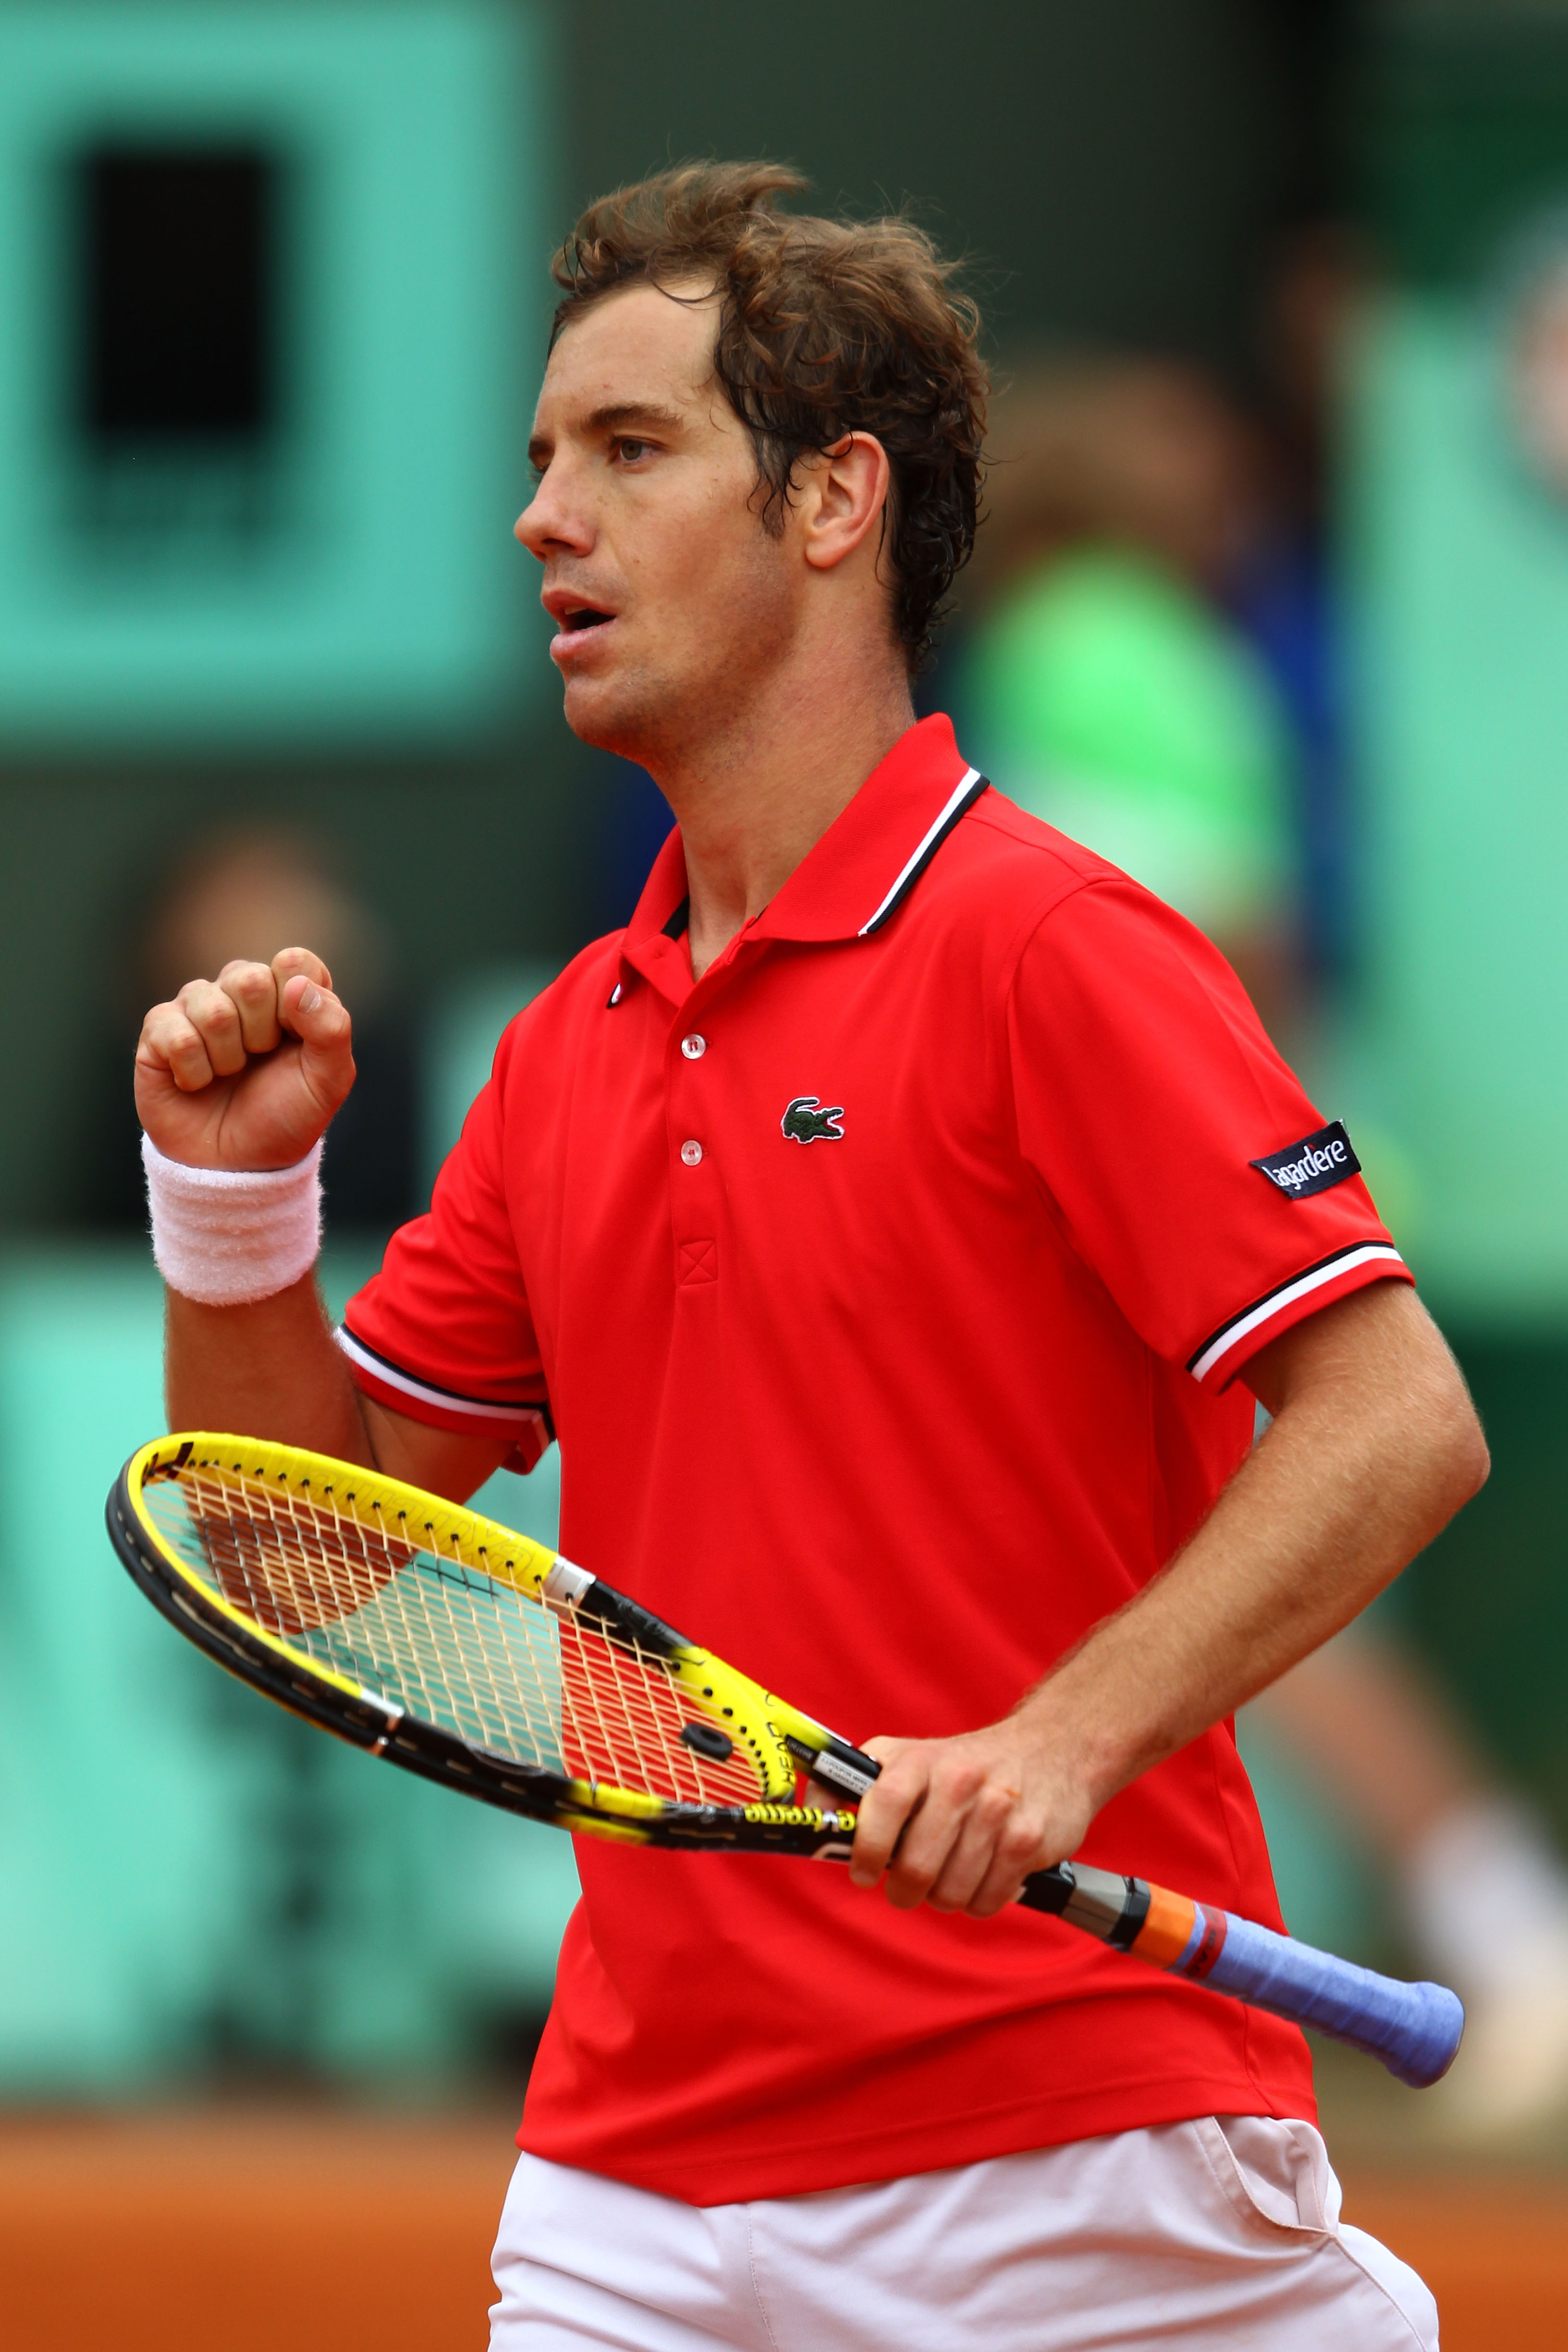 PARIS, FRANCE - MAY 27:  Richard Gasquet of France celebrates a point during the men's singles round three match between Richard Gasquet of France and Thomaz Bellucci of Brazil on day six of the French Open at Roland Garros on May 27, 2011 in Paris, Franc